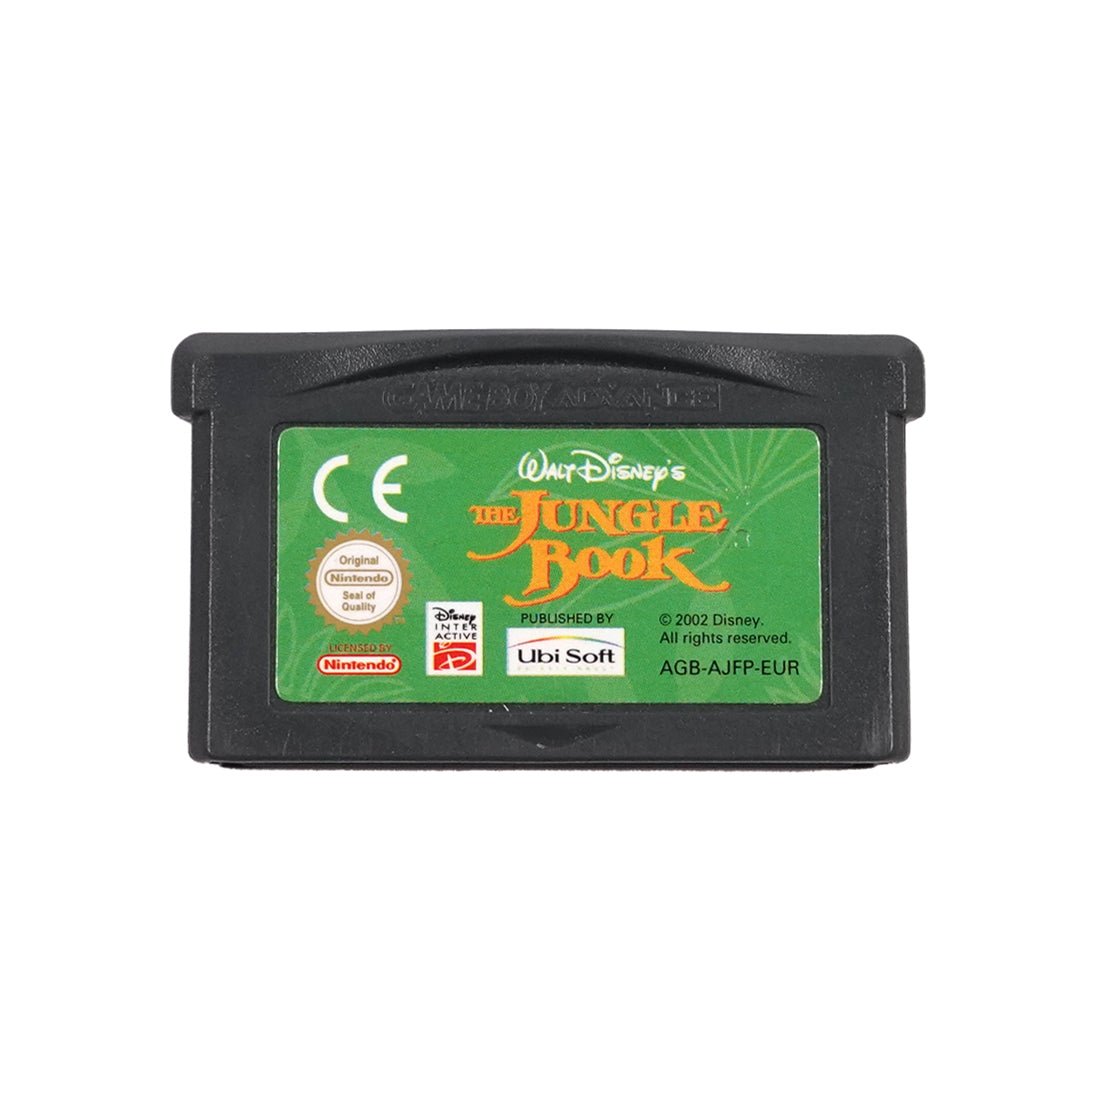 (Pre-Owned) The Jungle Book - Gameboy Advance - Store 974 | ستور ٩٧٤